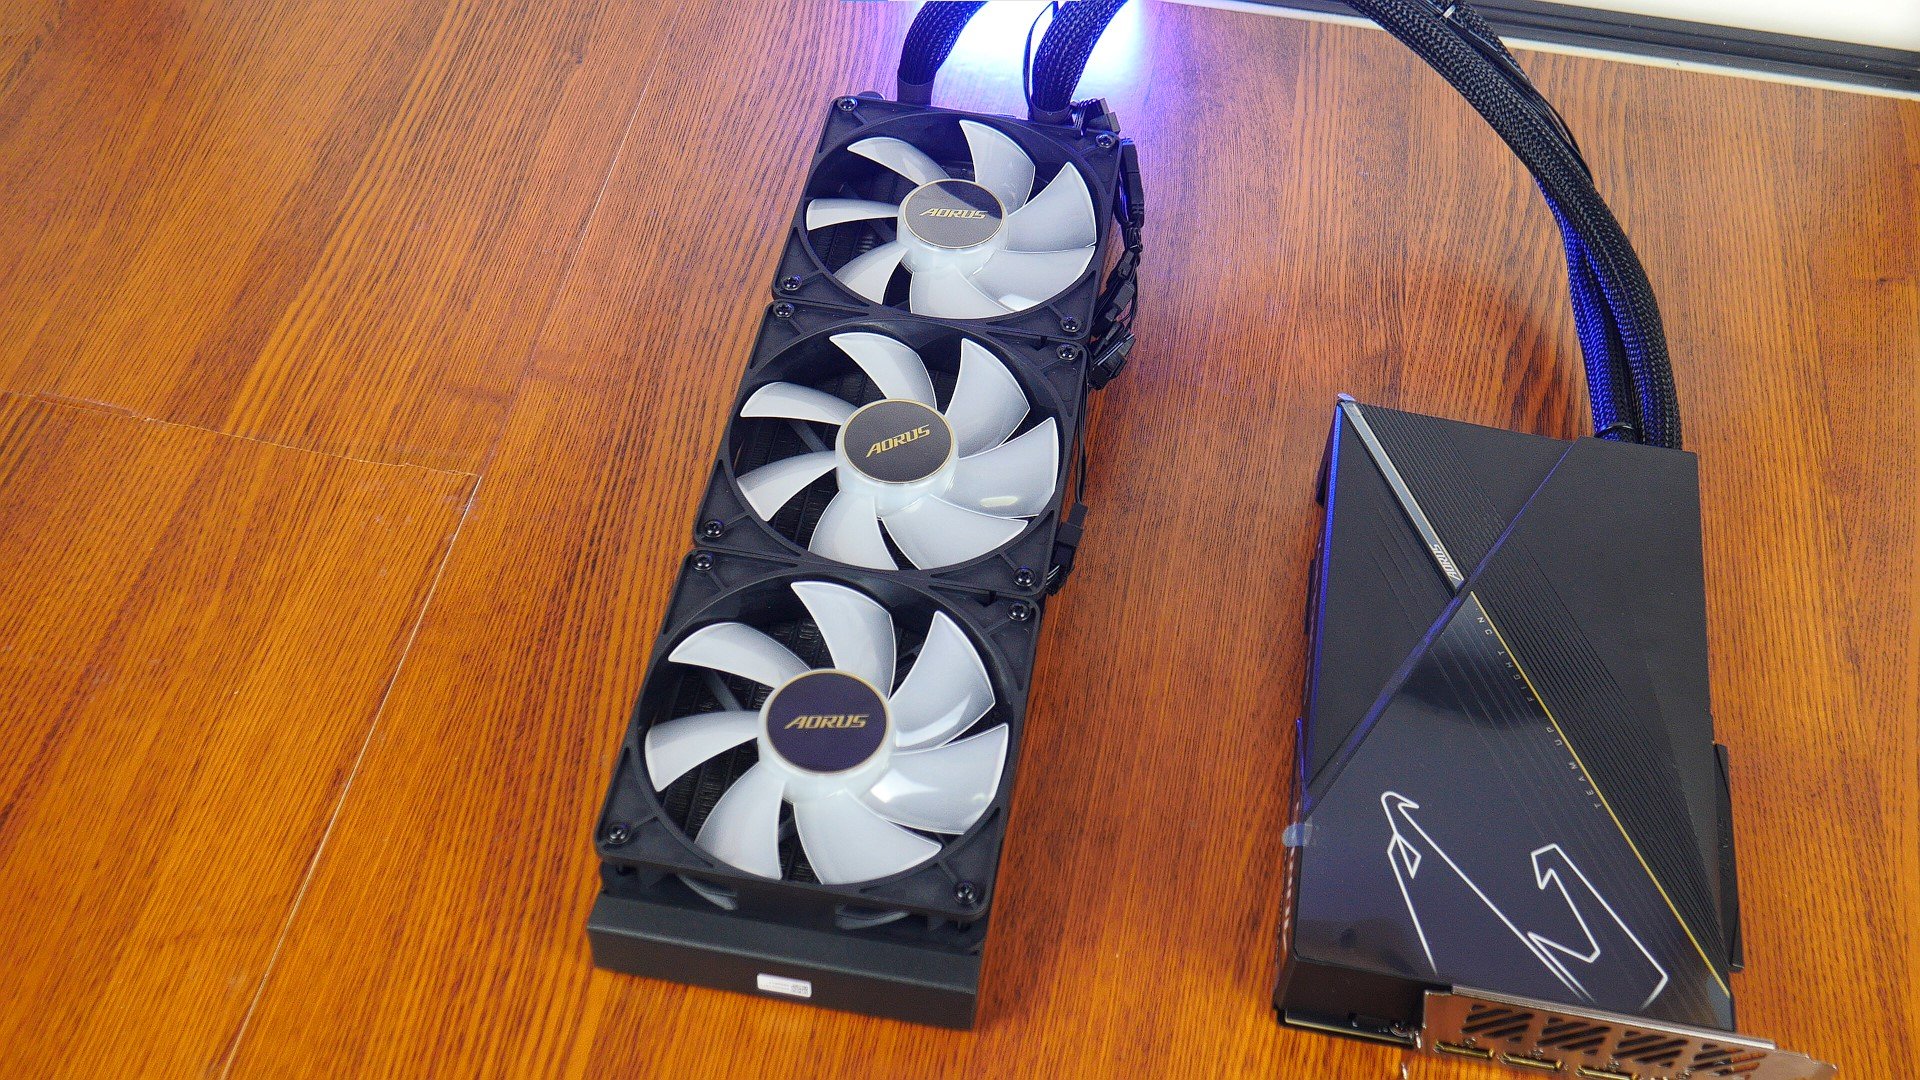 Unboxed: Gigabyte AORUS GeForce RTX 4080 16GB XTREME Graphics Card